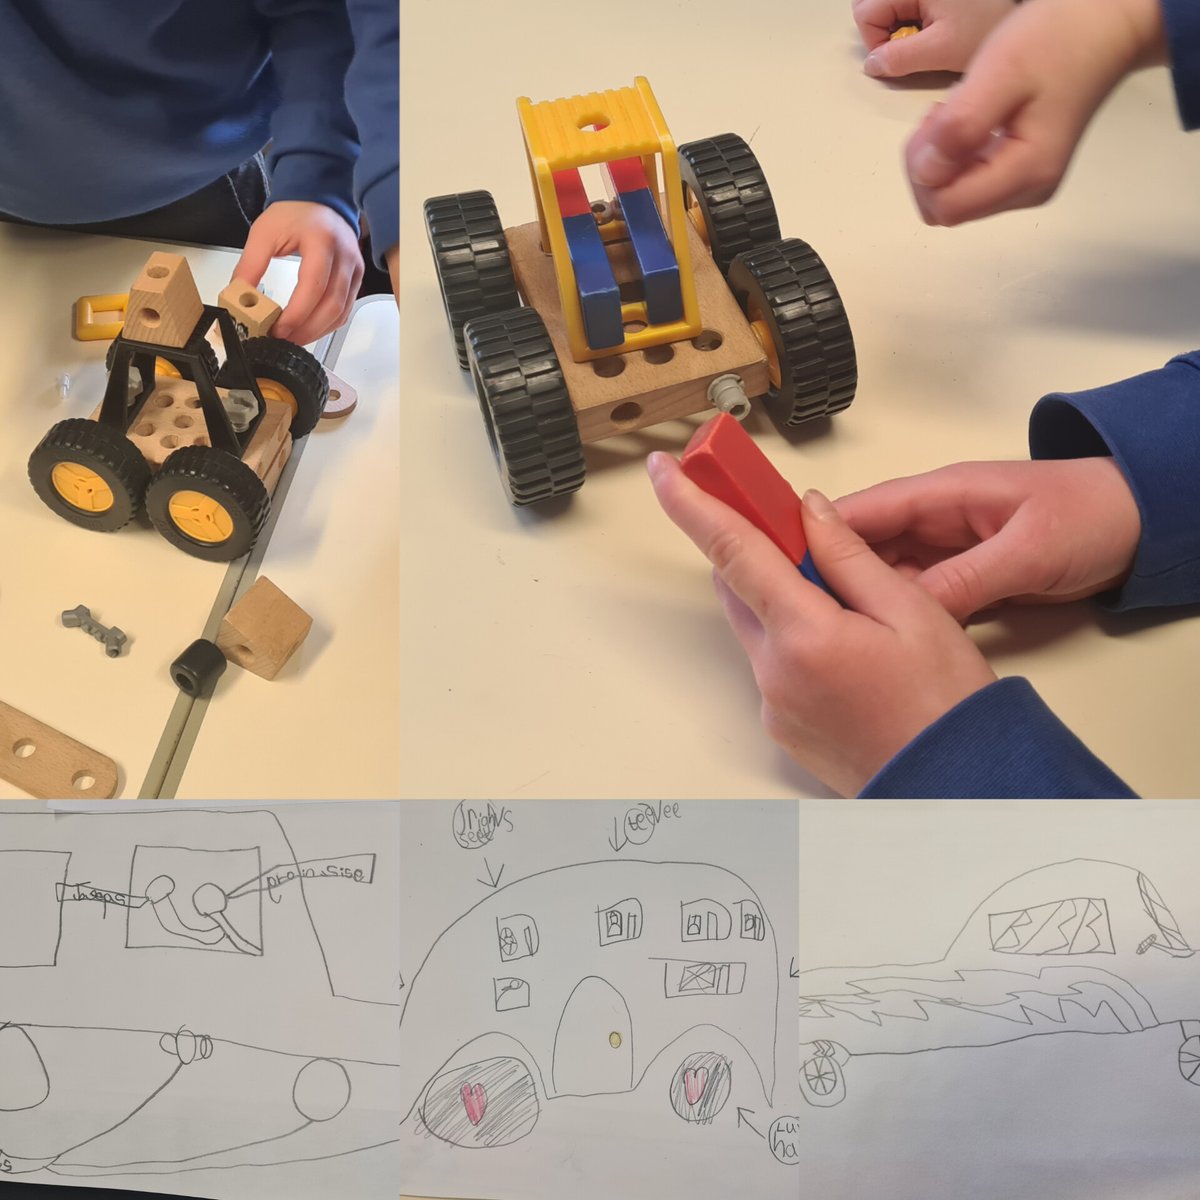 Year 1 are designing and making superhero vehicles using magnets to push and pull them.